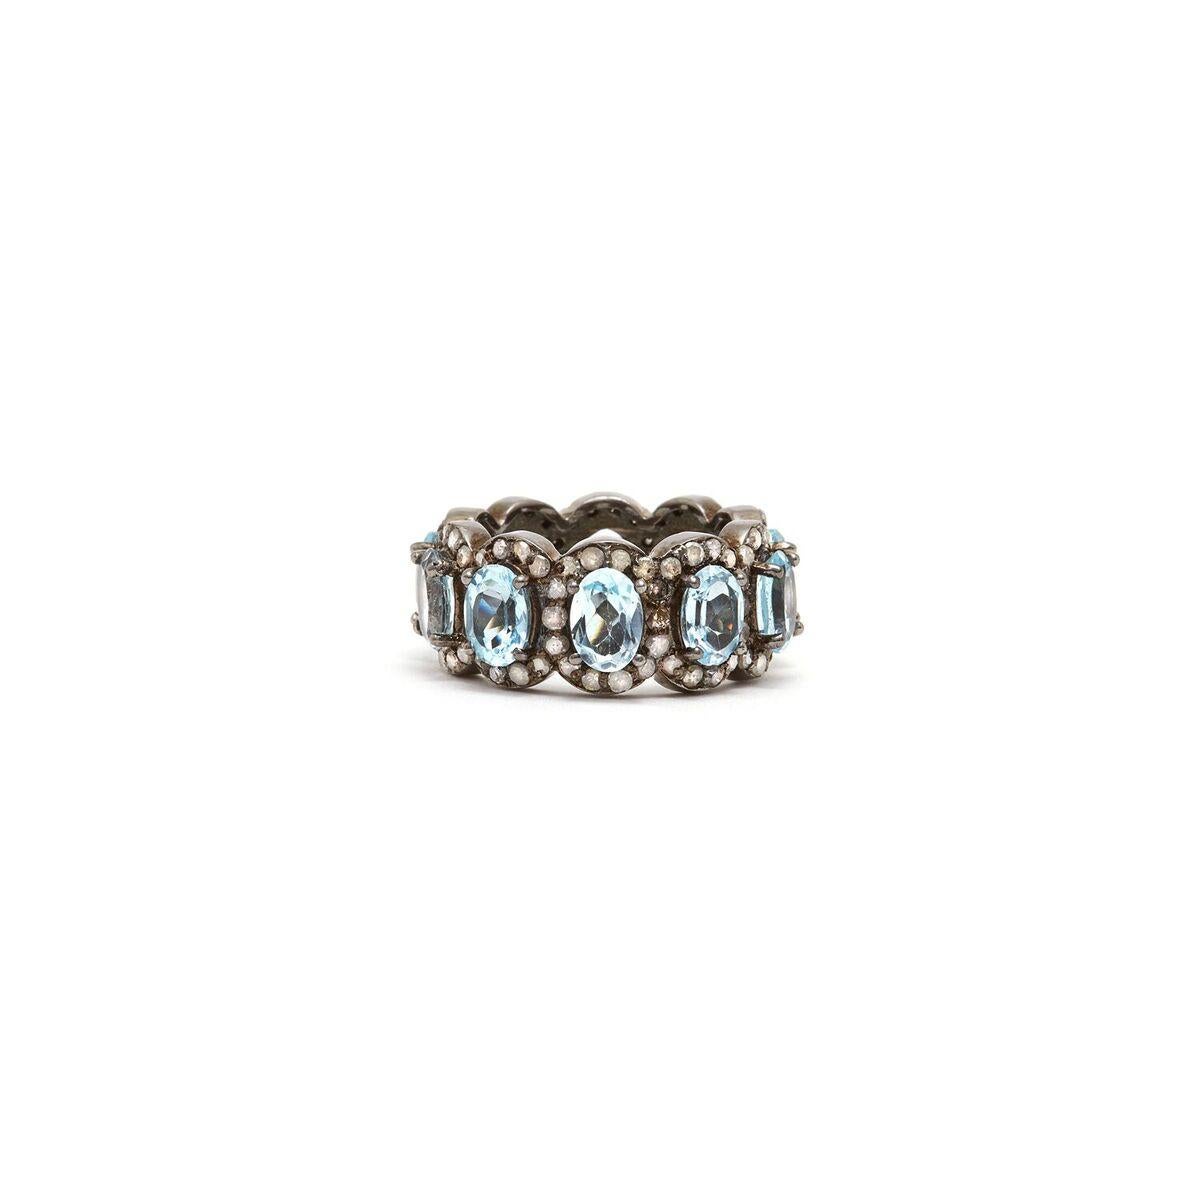 Ice blue Aquamarine baguettes accented with Diamonds in a blackened silver band reminiscent of an Art Deco Tiara.

- Natural Ice Blue Aquamarine.
- White Diamonds.
- Set in Blackened Oxidized Silver.